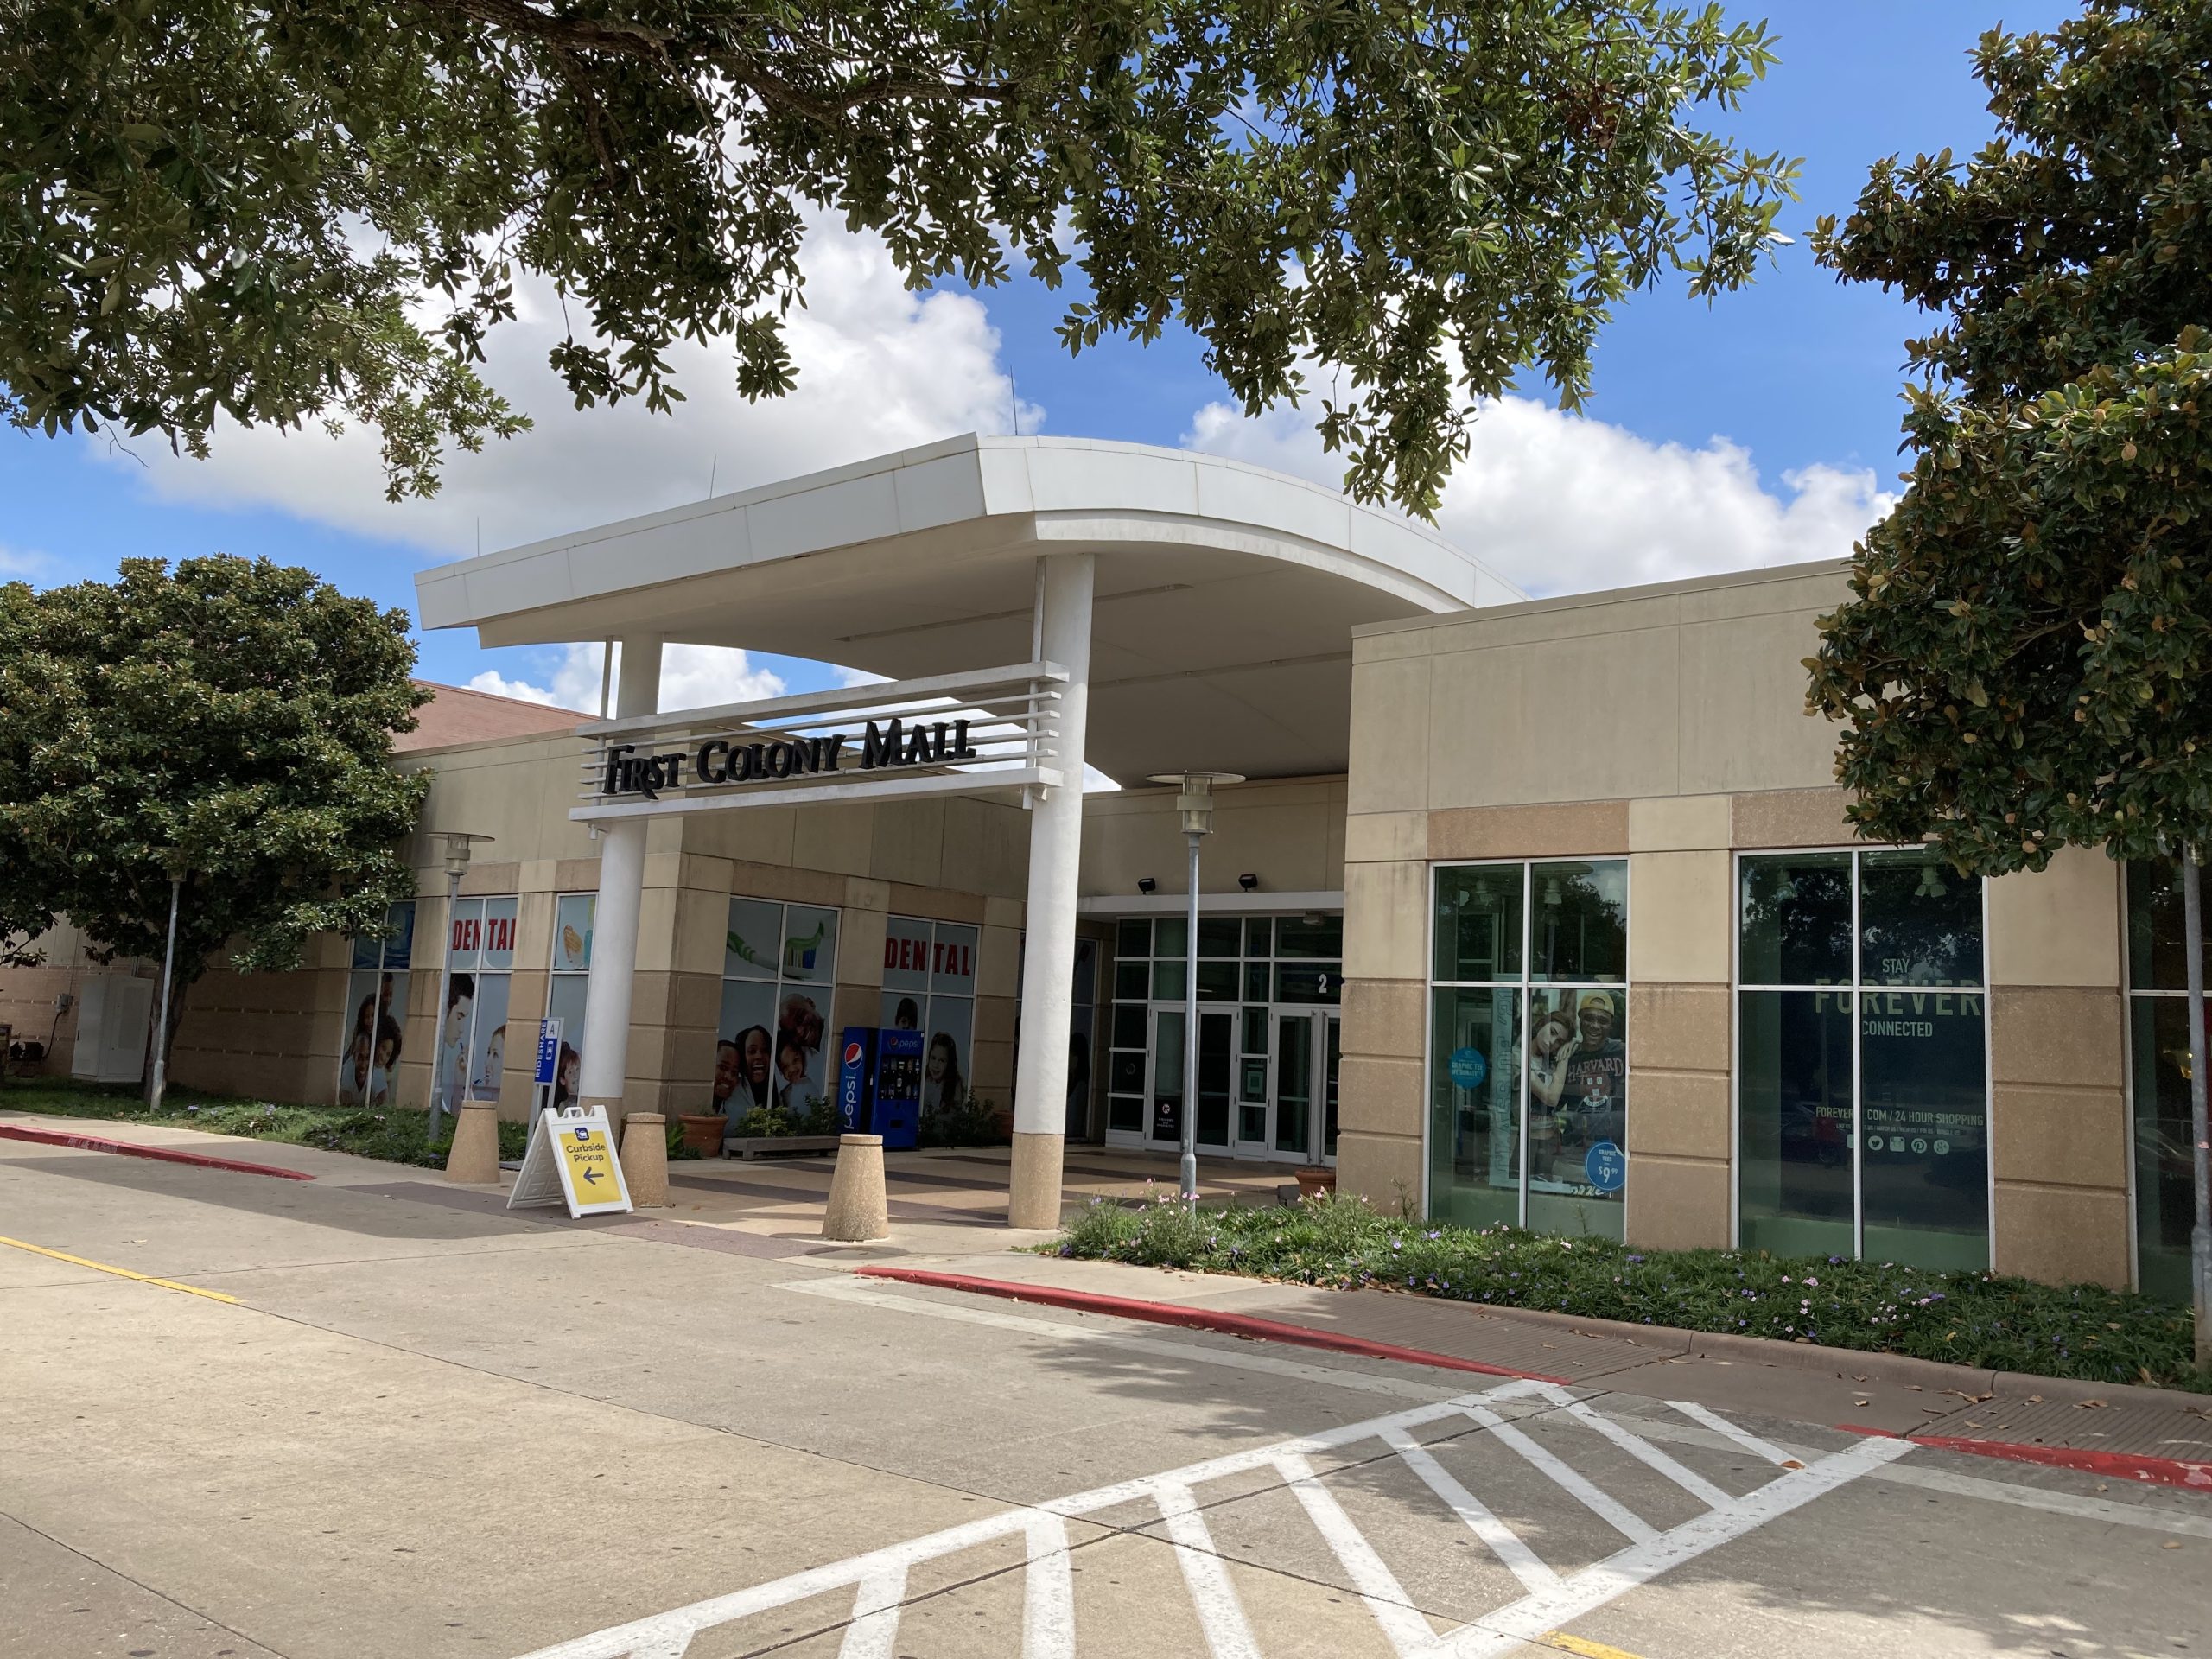 First Colony Mall Houston Historic Retail